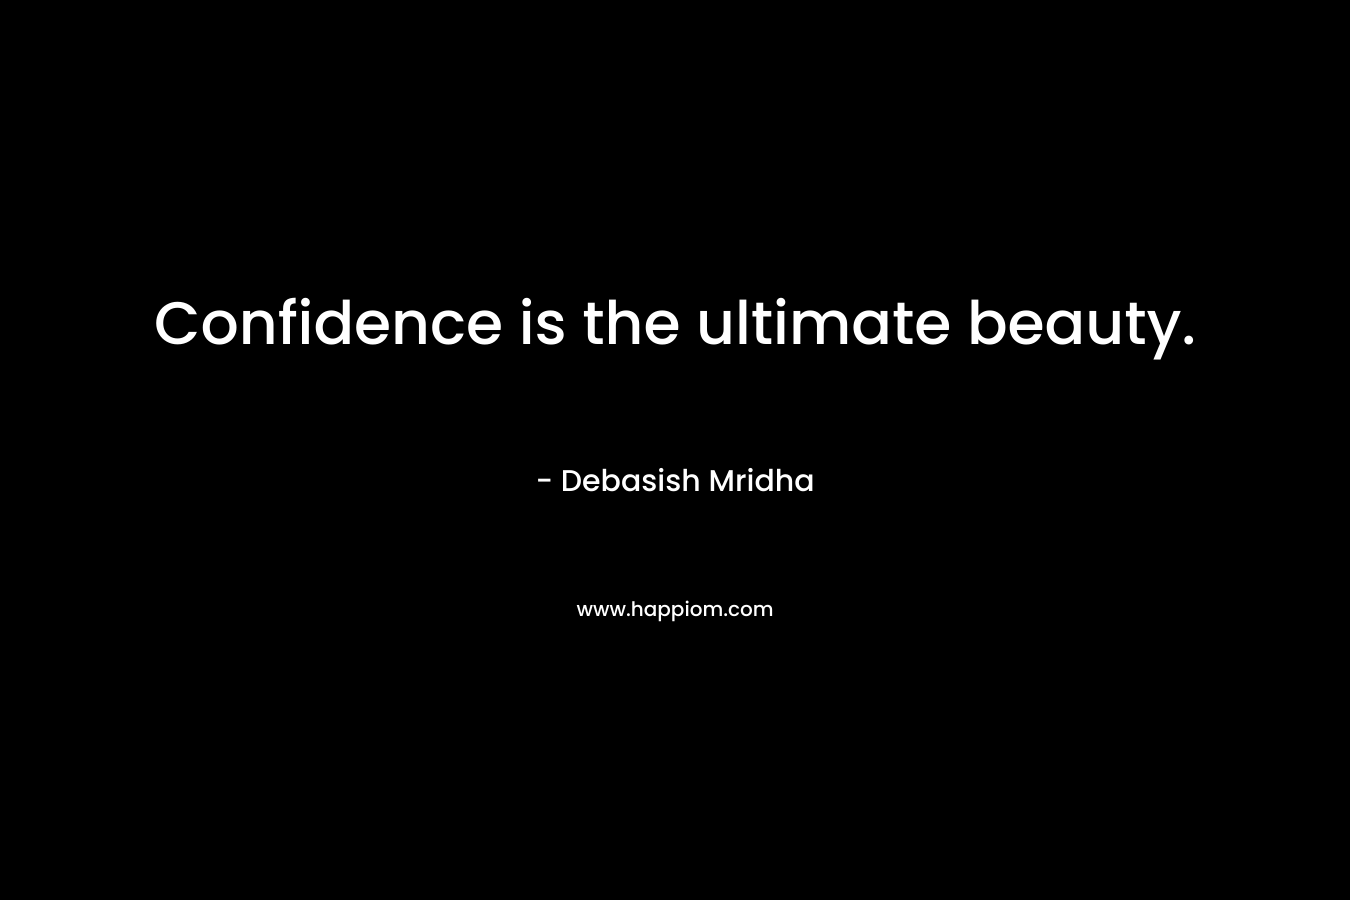 Confidence is the ultimate beauty.